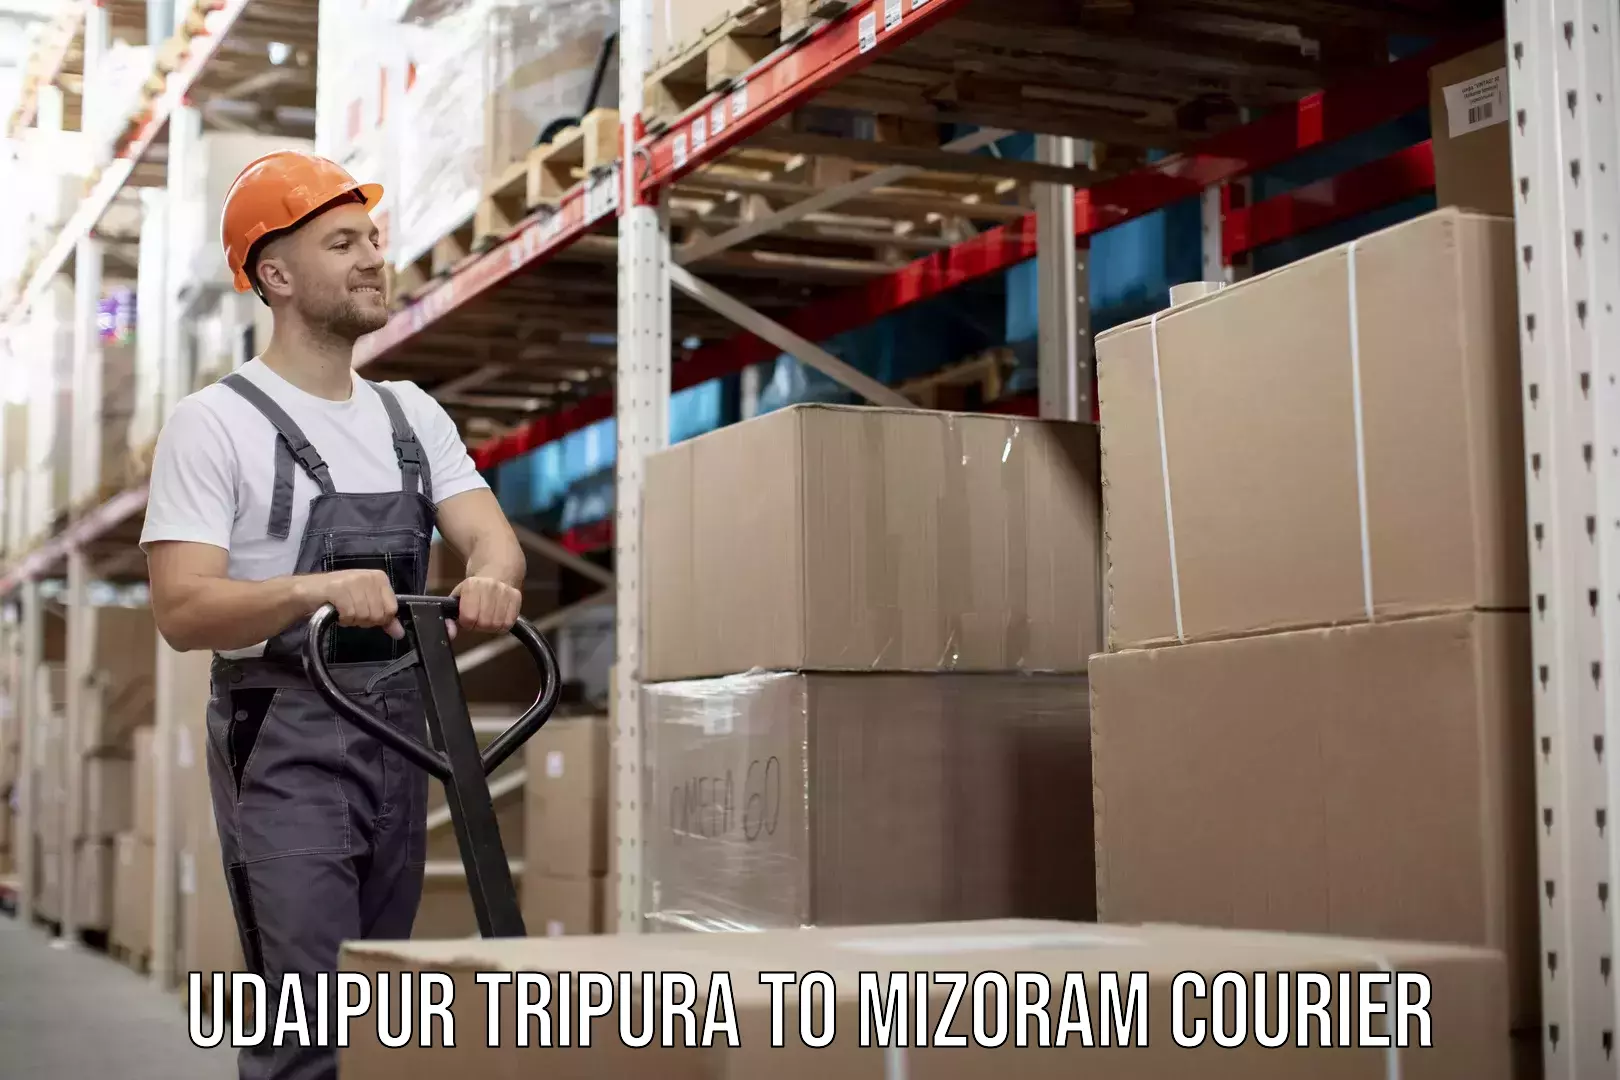 State-of-the-art courier technology Udaipur Tripura to Mizoram